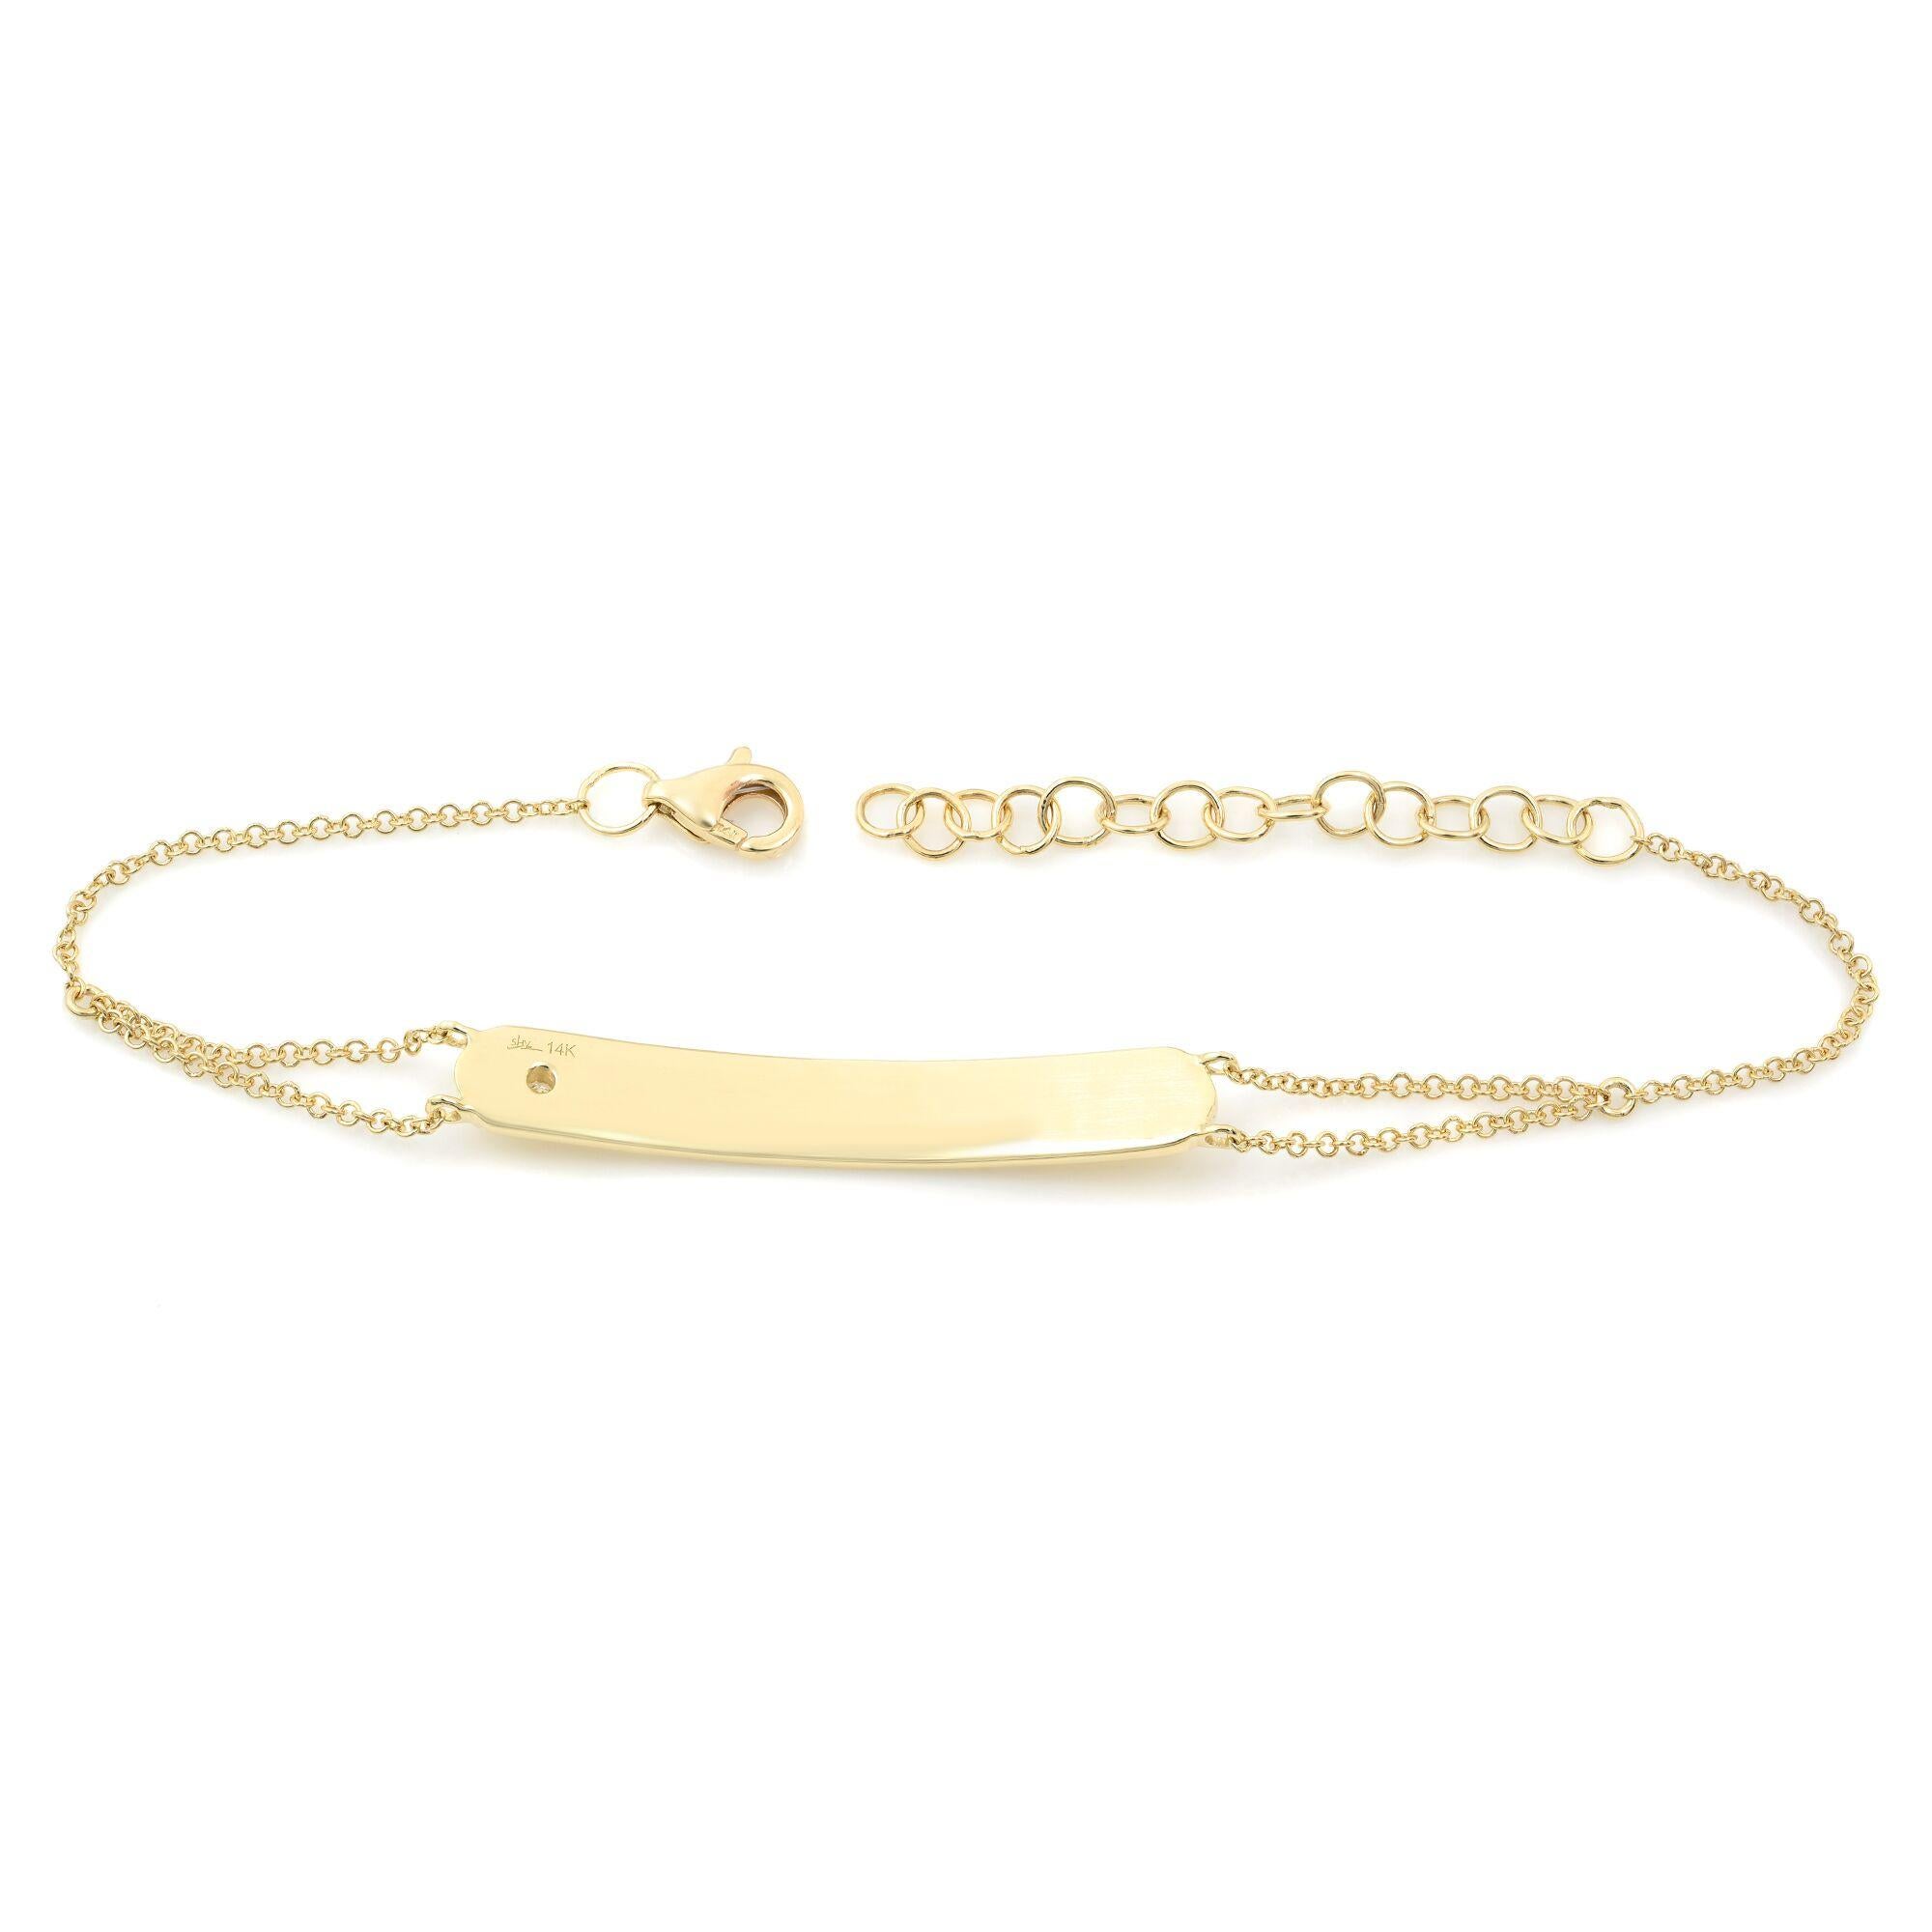 Stunning diamond plate bracelet, crafted in 14k yellow gold. This bracelet features a round cut diamond weighing 0.02ct. Diamond quality: color G-H and SI1 clarity. Bracelet Length: 7.0 inches (adjustable), width: 0.20inch. Weight: 3.3 grams. Comes